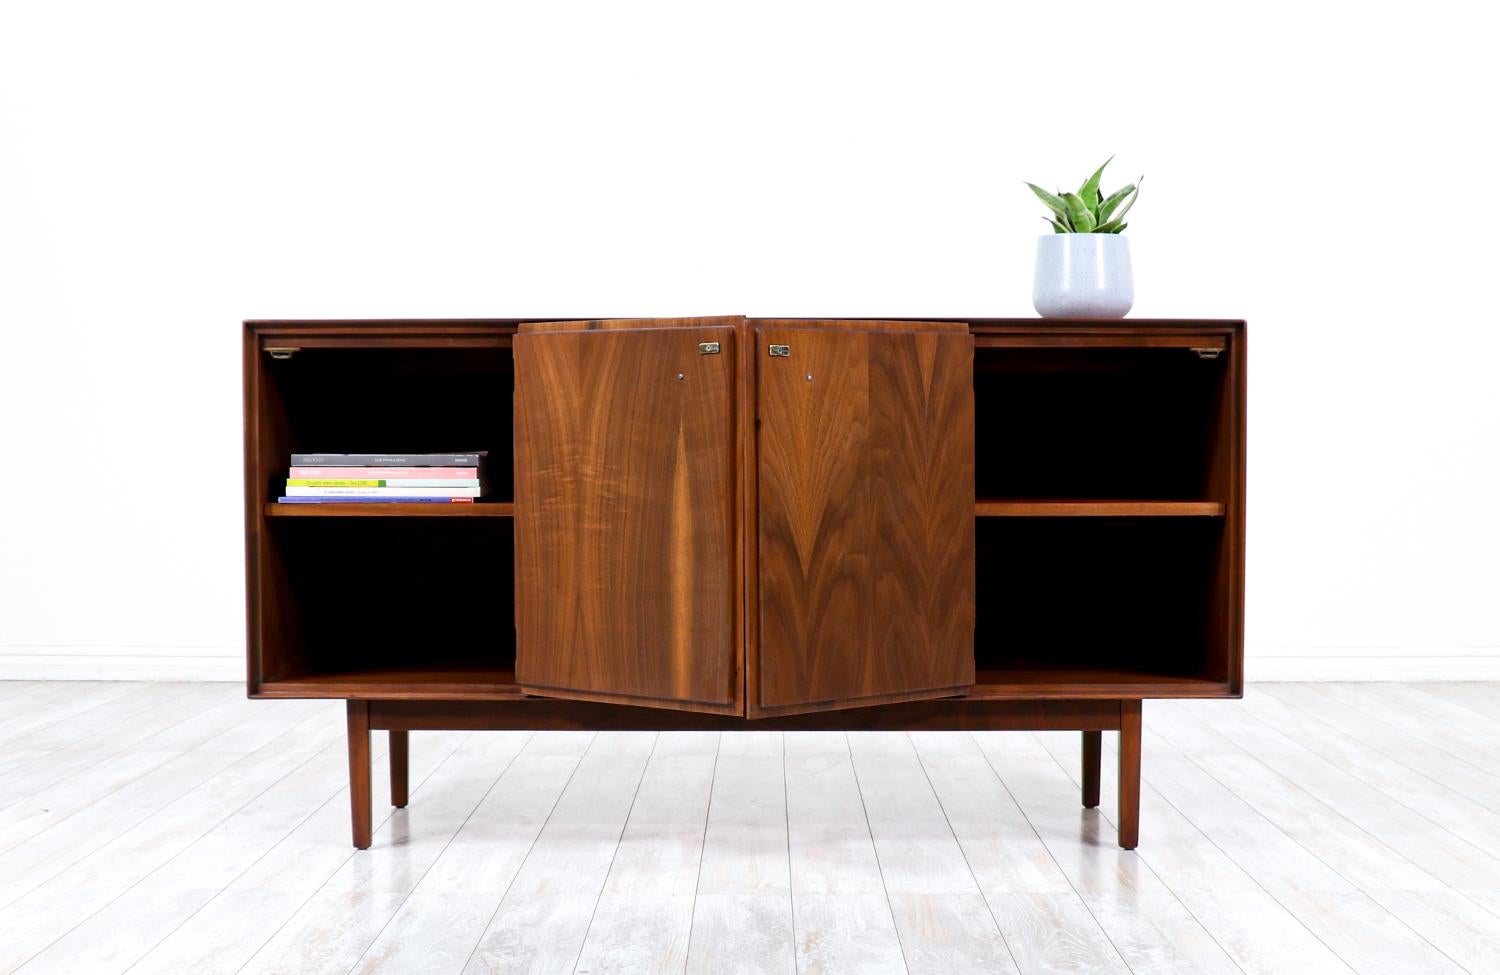 American Mid-Century Modern Walnut Credenza with Rosewood Inlaid by Stanley Furniture